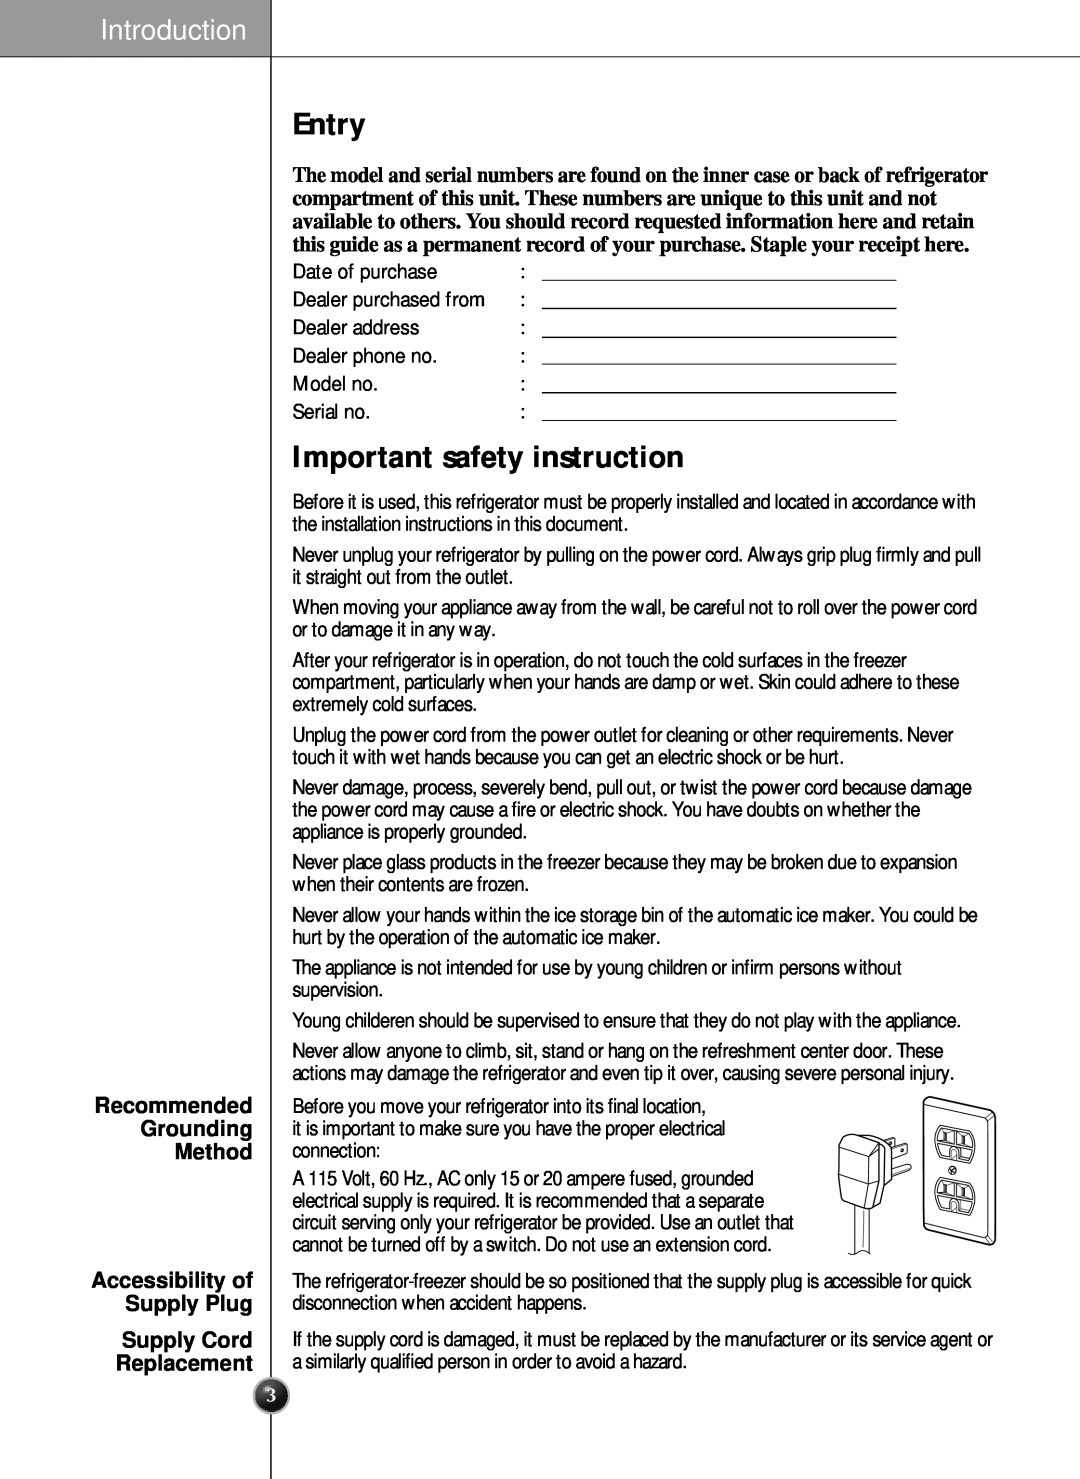 LG Electronics LRSC21951ST manual Entry, Important safety instruction, Introduction, Recommended Grounding Method 